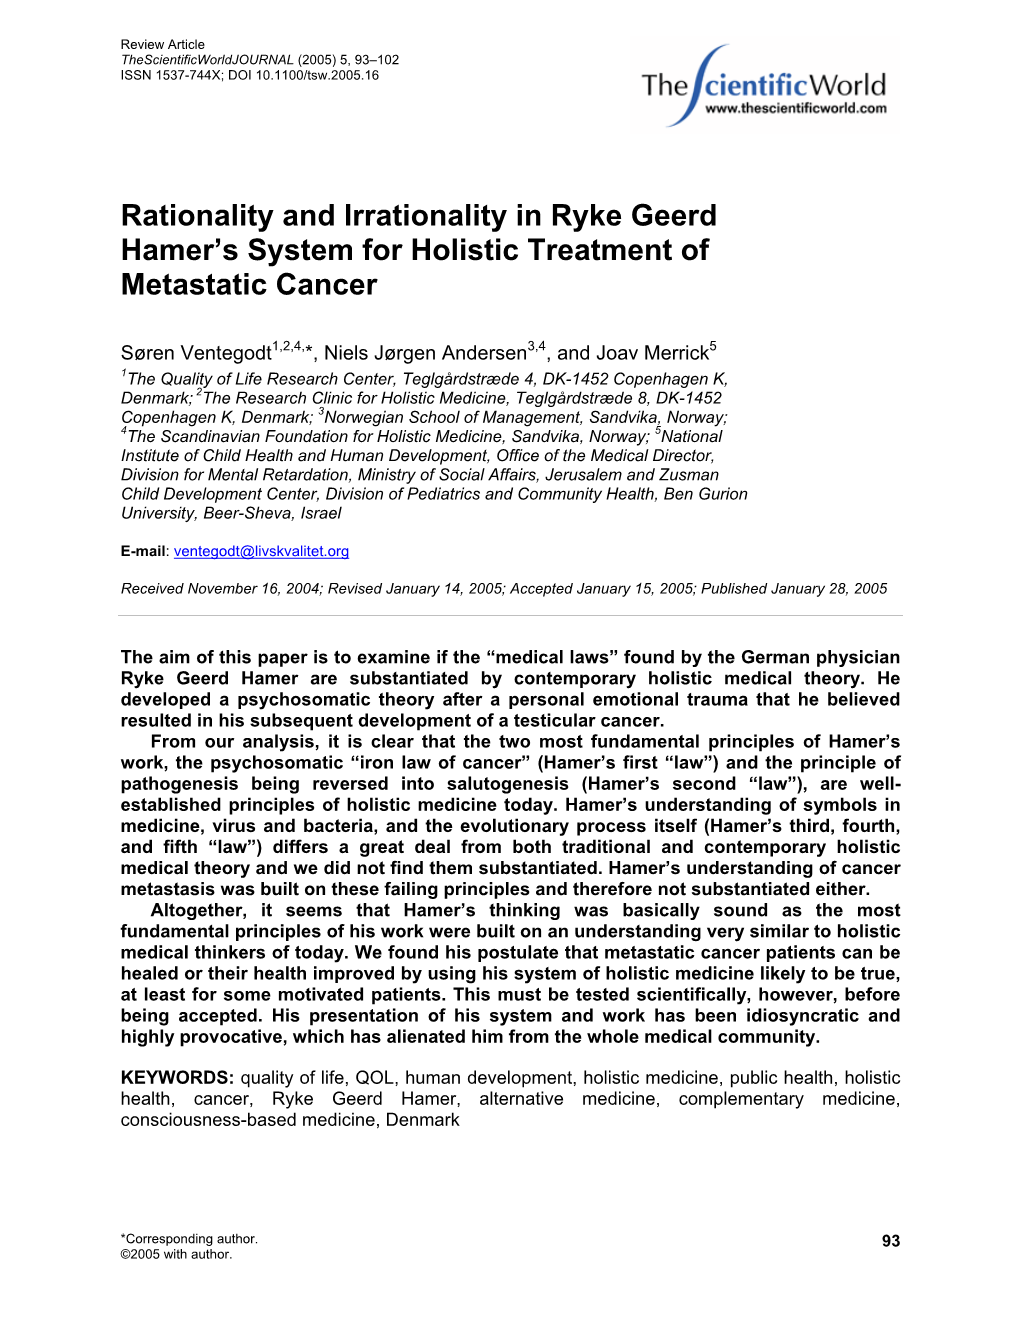 Rationality and Irrationality in Ryke Geerd Hamer's System for Holistic